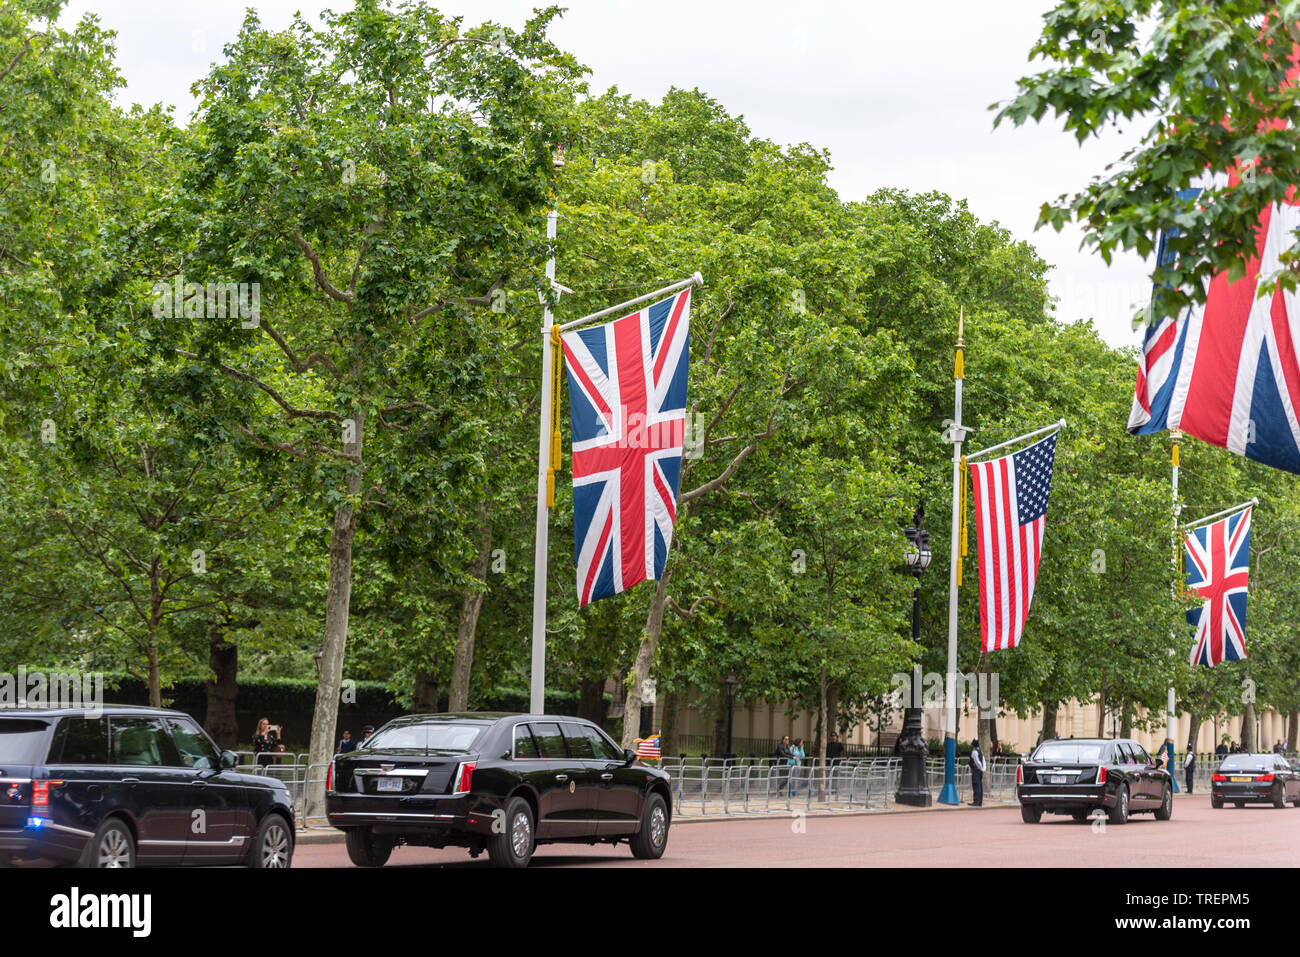 US President Donald Trump is driven from St. James's Palace down The Mall, London, UK to No.10 Downing Street to meet with Theresa May. He travelled in the second 'Beast' within the motorcade Stock Photo